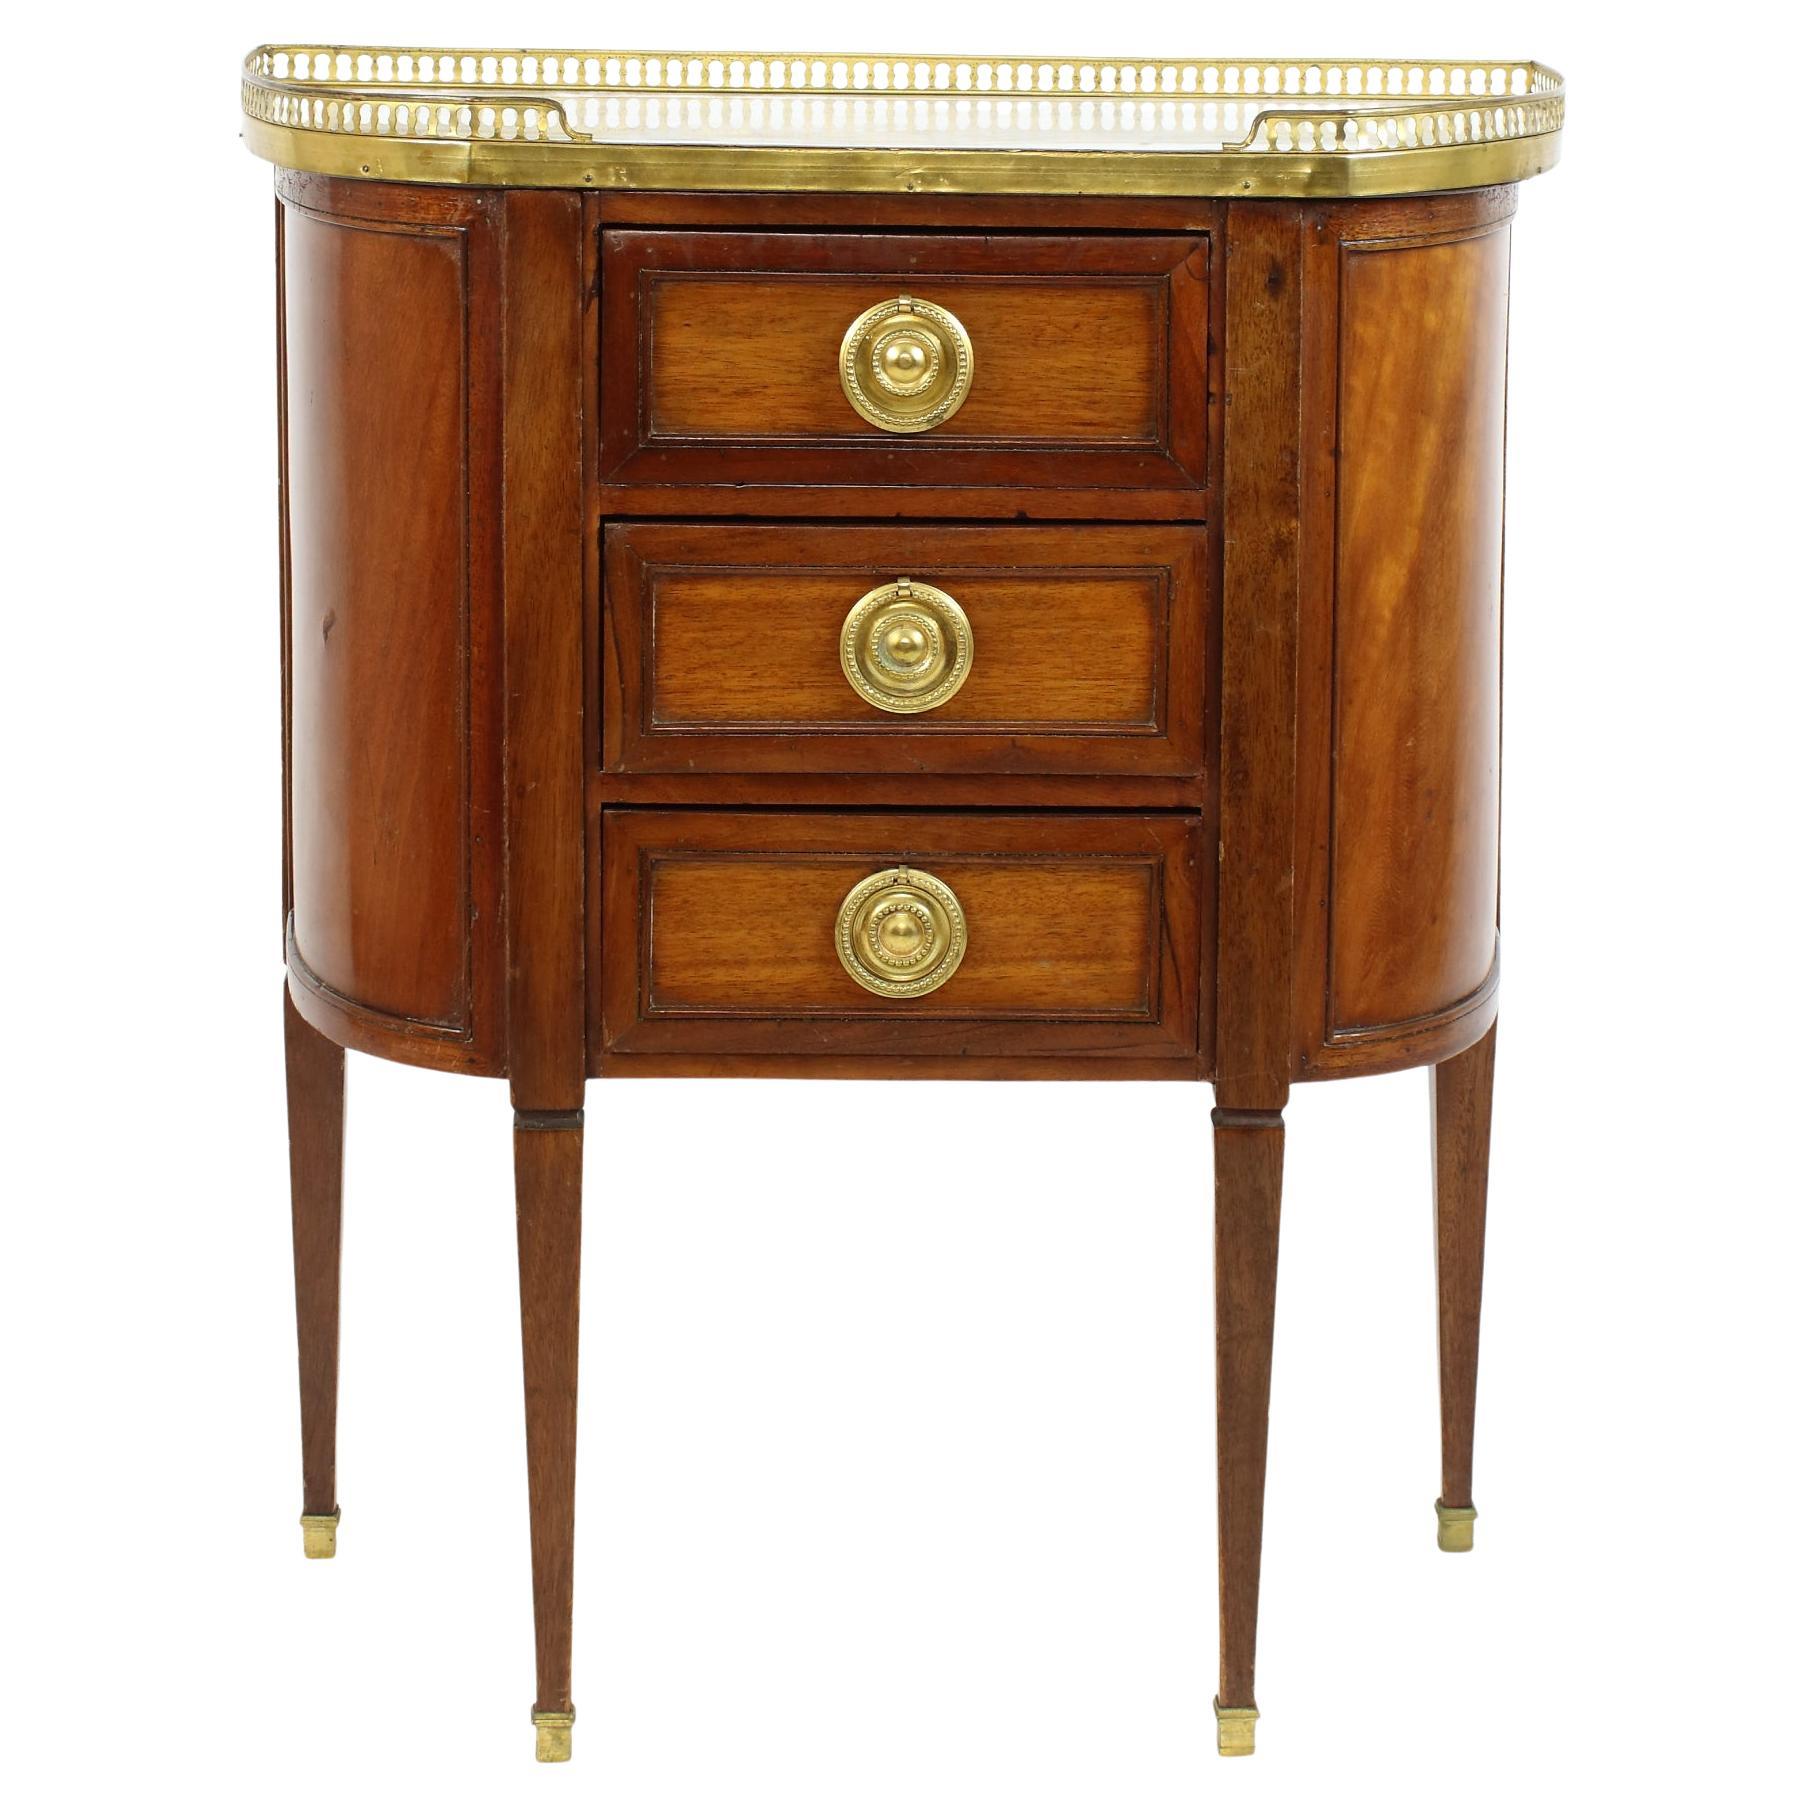 Late 18th Century Louis XVI Walnut Demilune Commode or Table Chiffonière For Sale